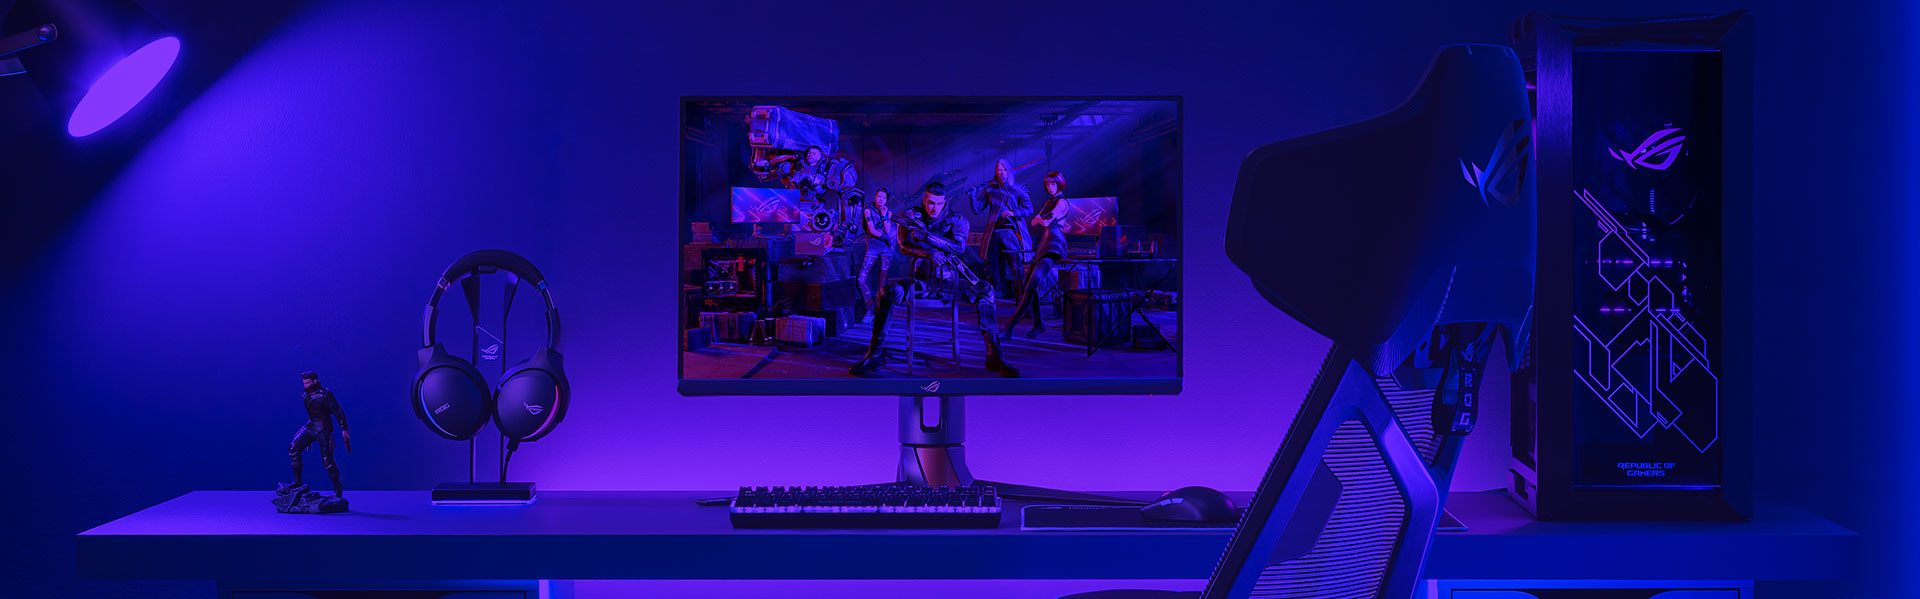 ROG gaming monitor setup with a PC, one keyboard and mouse, and a headset on the desk